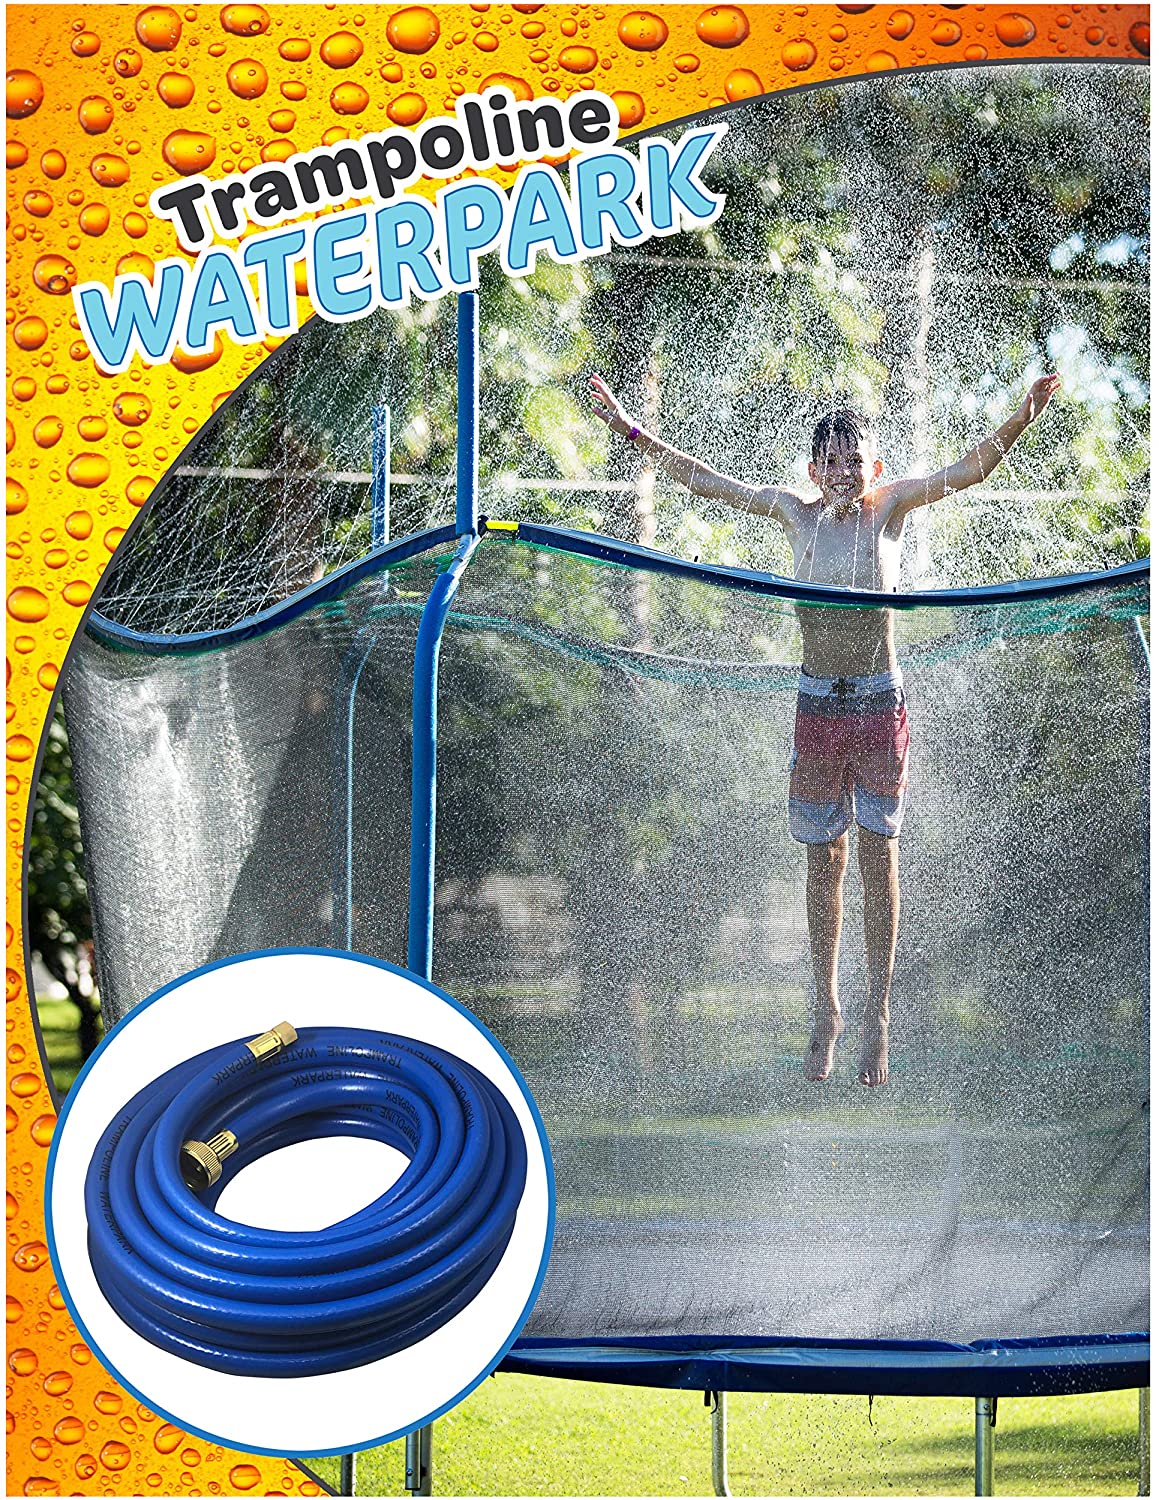 Trampoline Waterpark Heavy Duty Sprinkler Hose for Boys, Girls and Adults